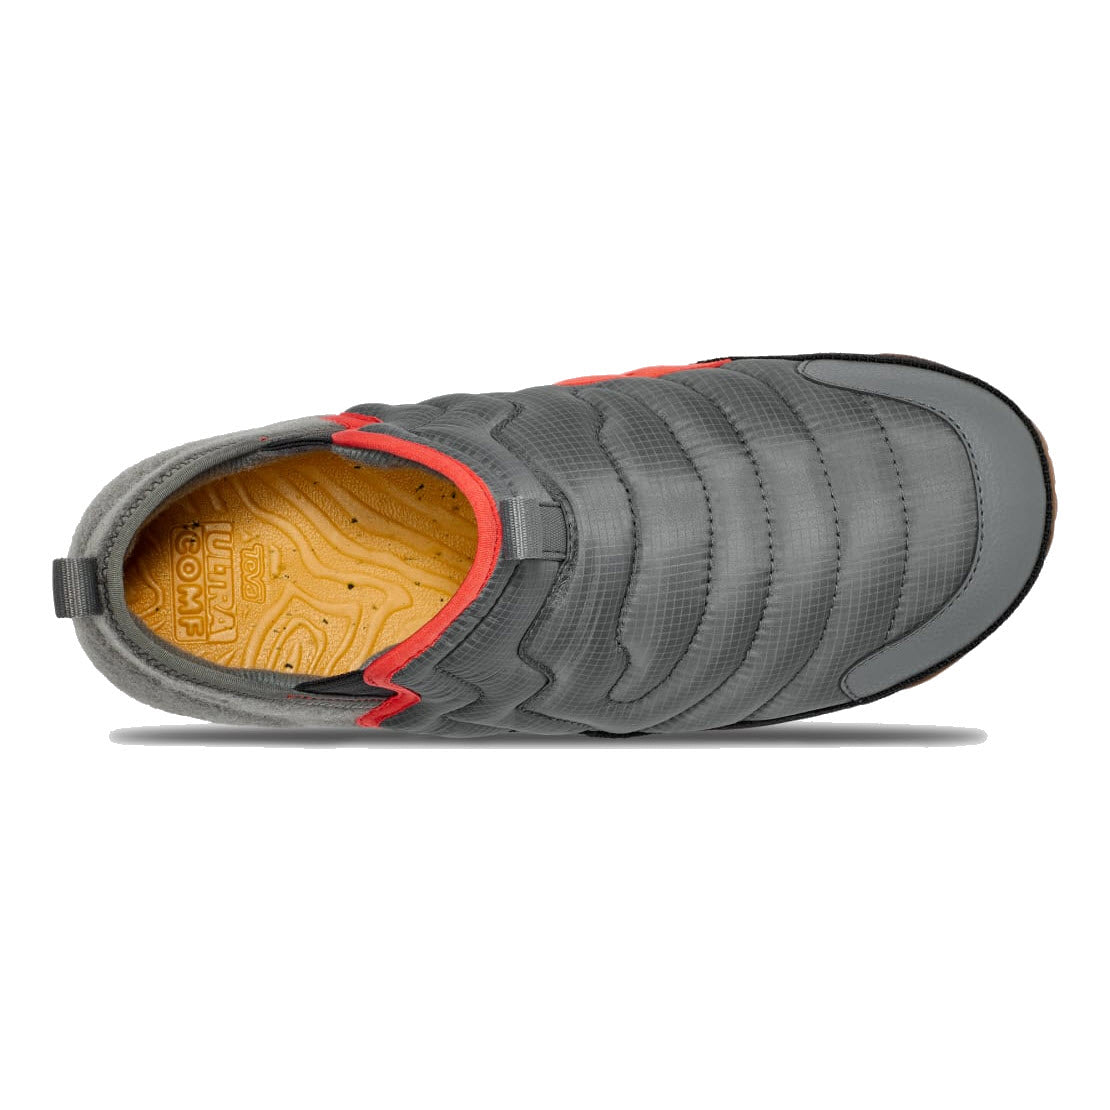 Top view of a gray TEVA REEMBER TERRAIN MID SLIP ON SEDONA SAGE MULTI - MENS sneaker with orange accents, displaying its textured sole and TevaRAPID RESIST fabric upper.